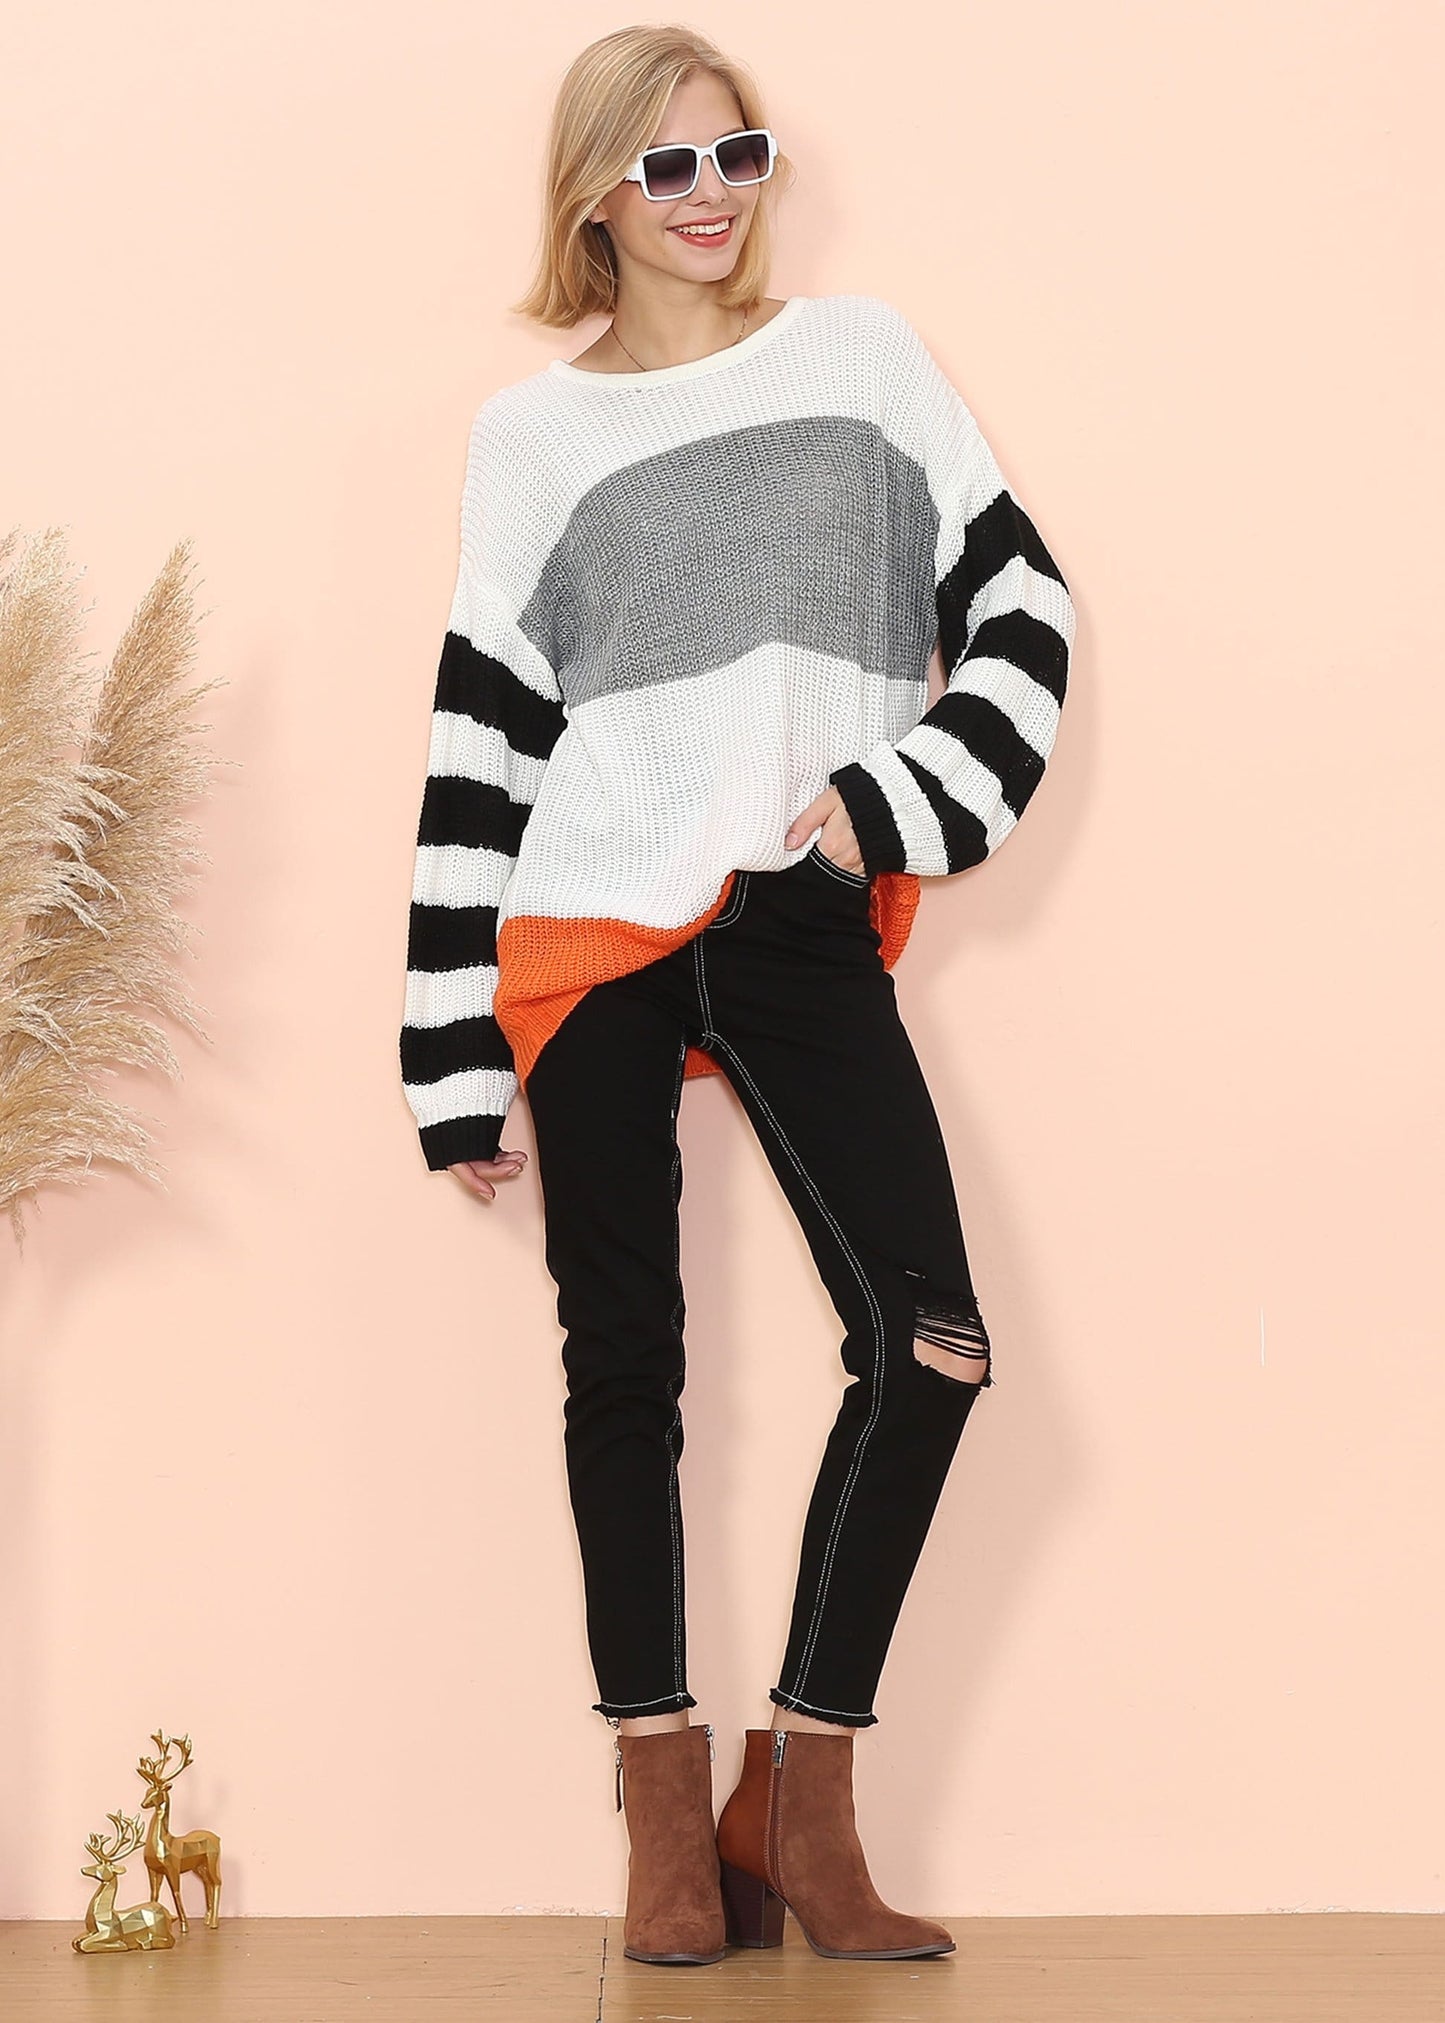 Mixed Striped Oversized Sweater